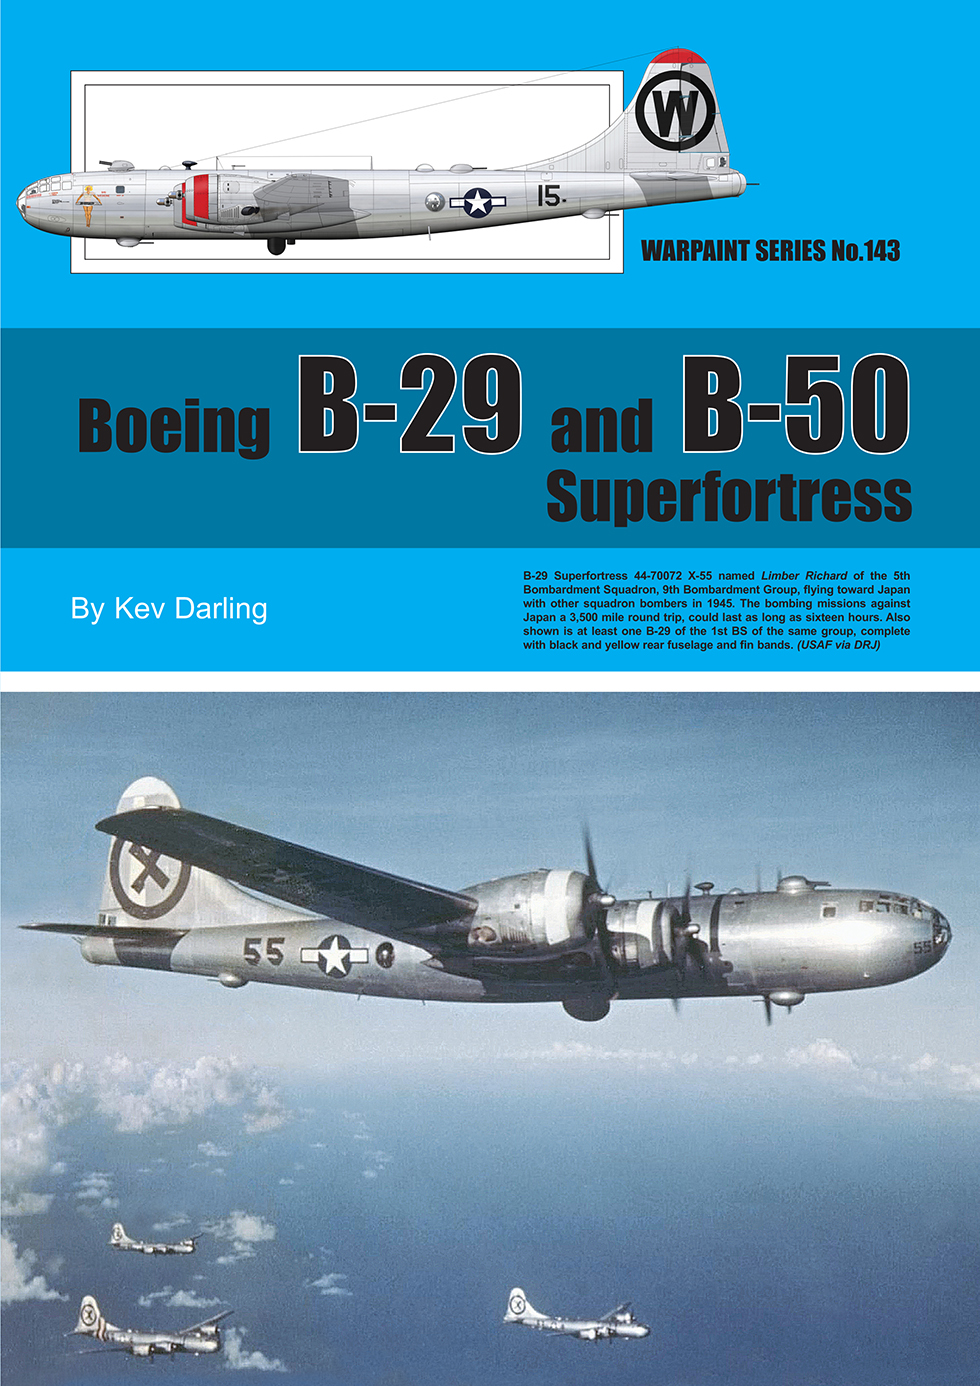 Guideline Publications Ltd Warpaint 143 Boeing B-29 and B-50 Superfortress - PRE ORDER By Kev Darling 